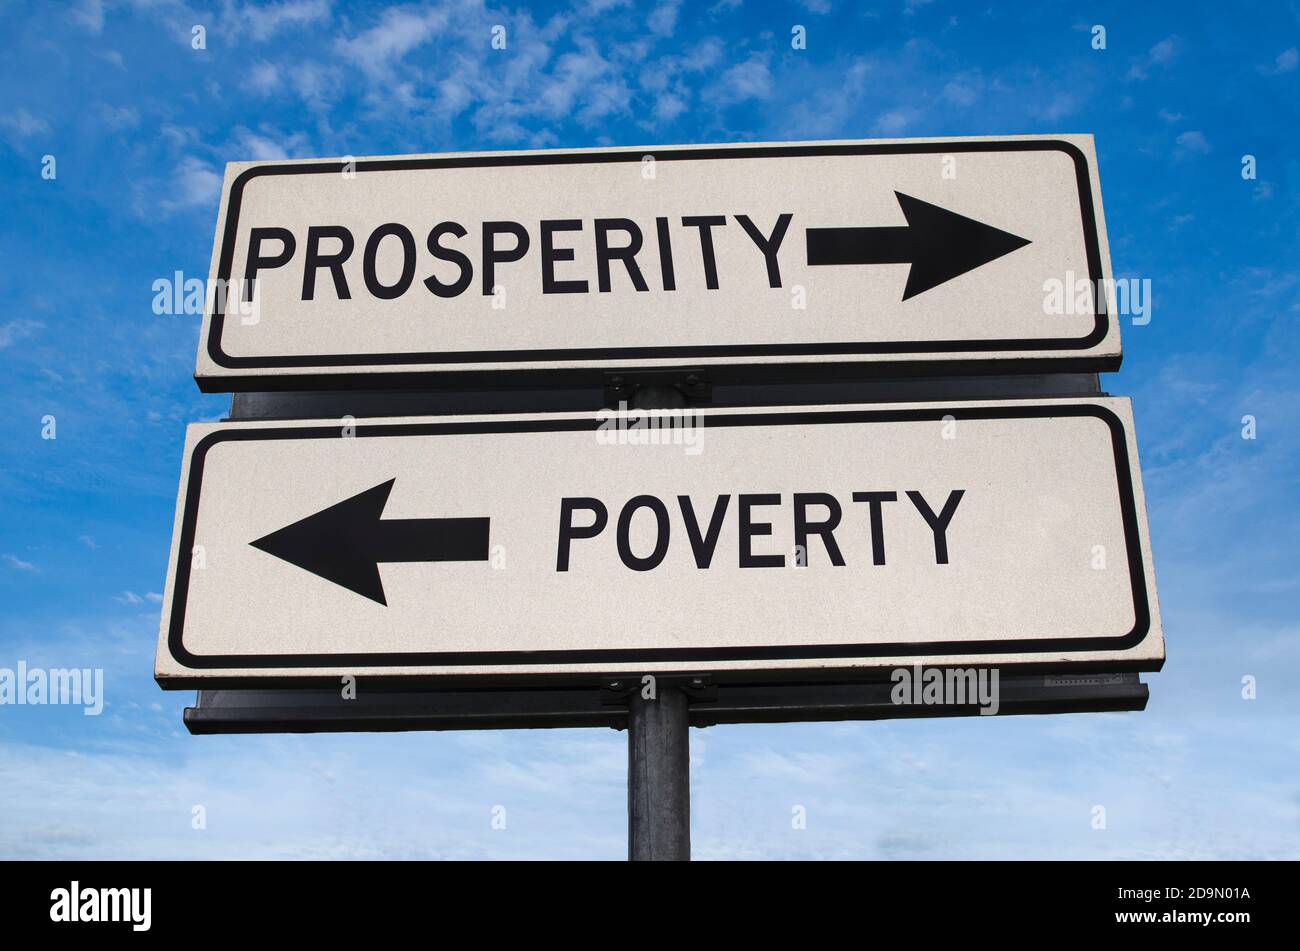 Poverty versus prosperity white arrow road sign on blue sky background. White two street signs with arrow on metal pole with word. Directional road. Stock Photo